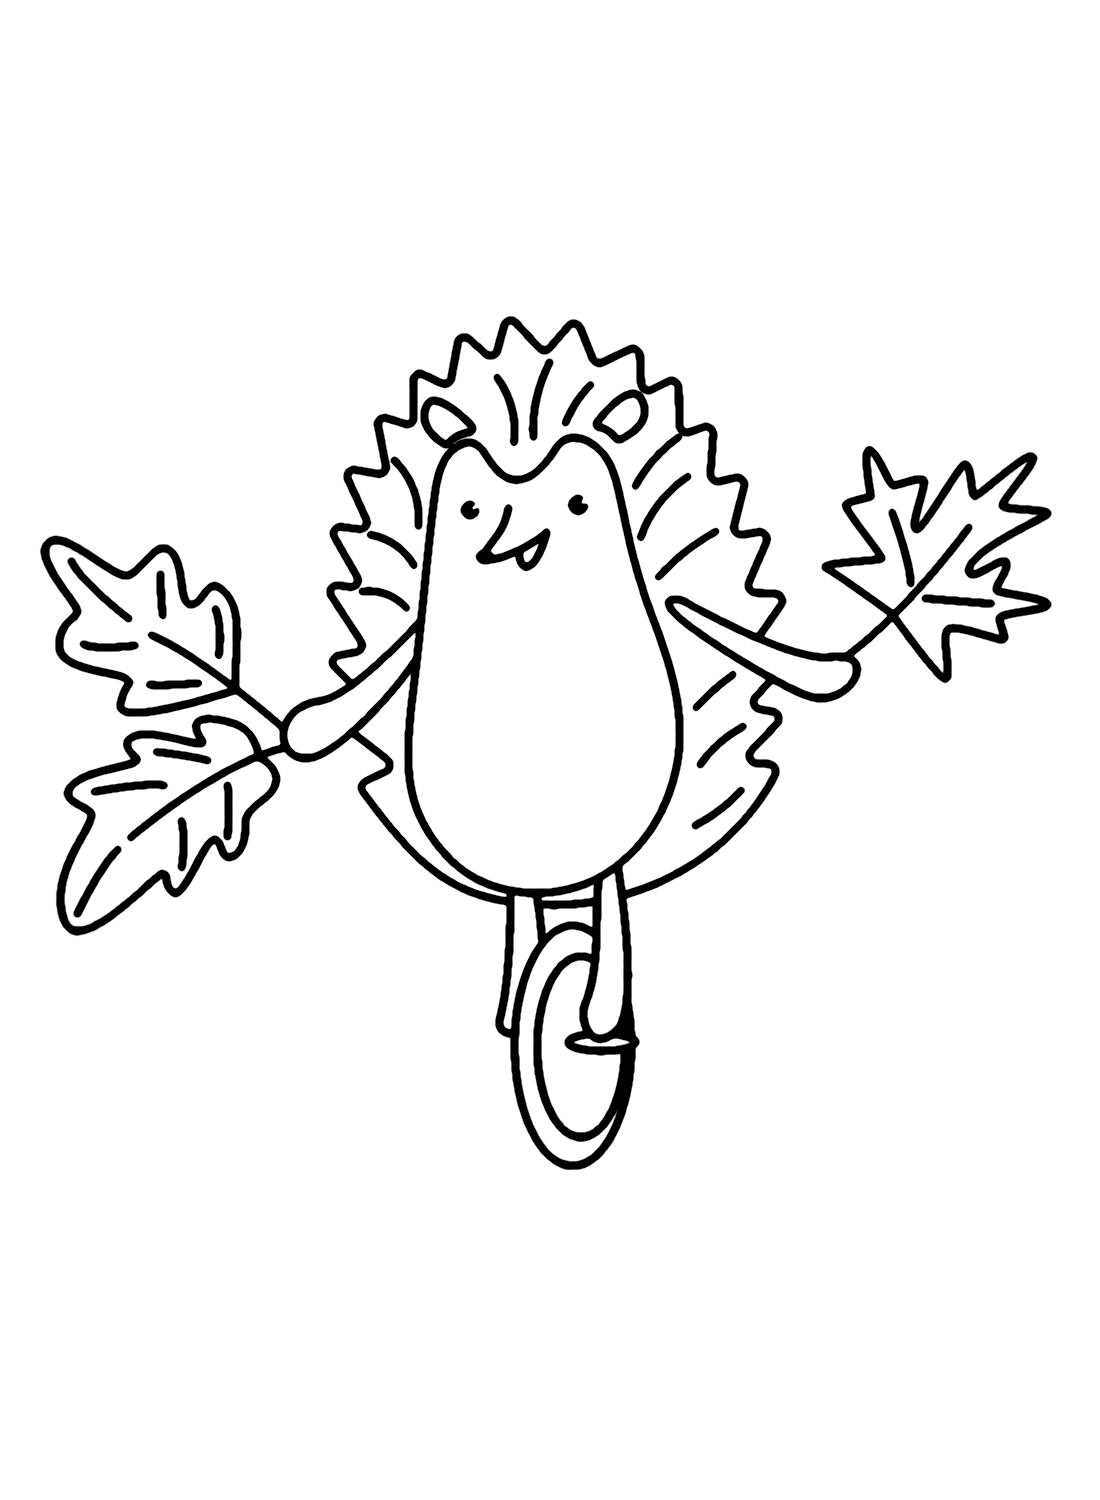 Hedgehog on a Unicycle Coloring Page